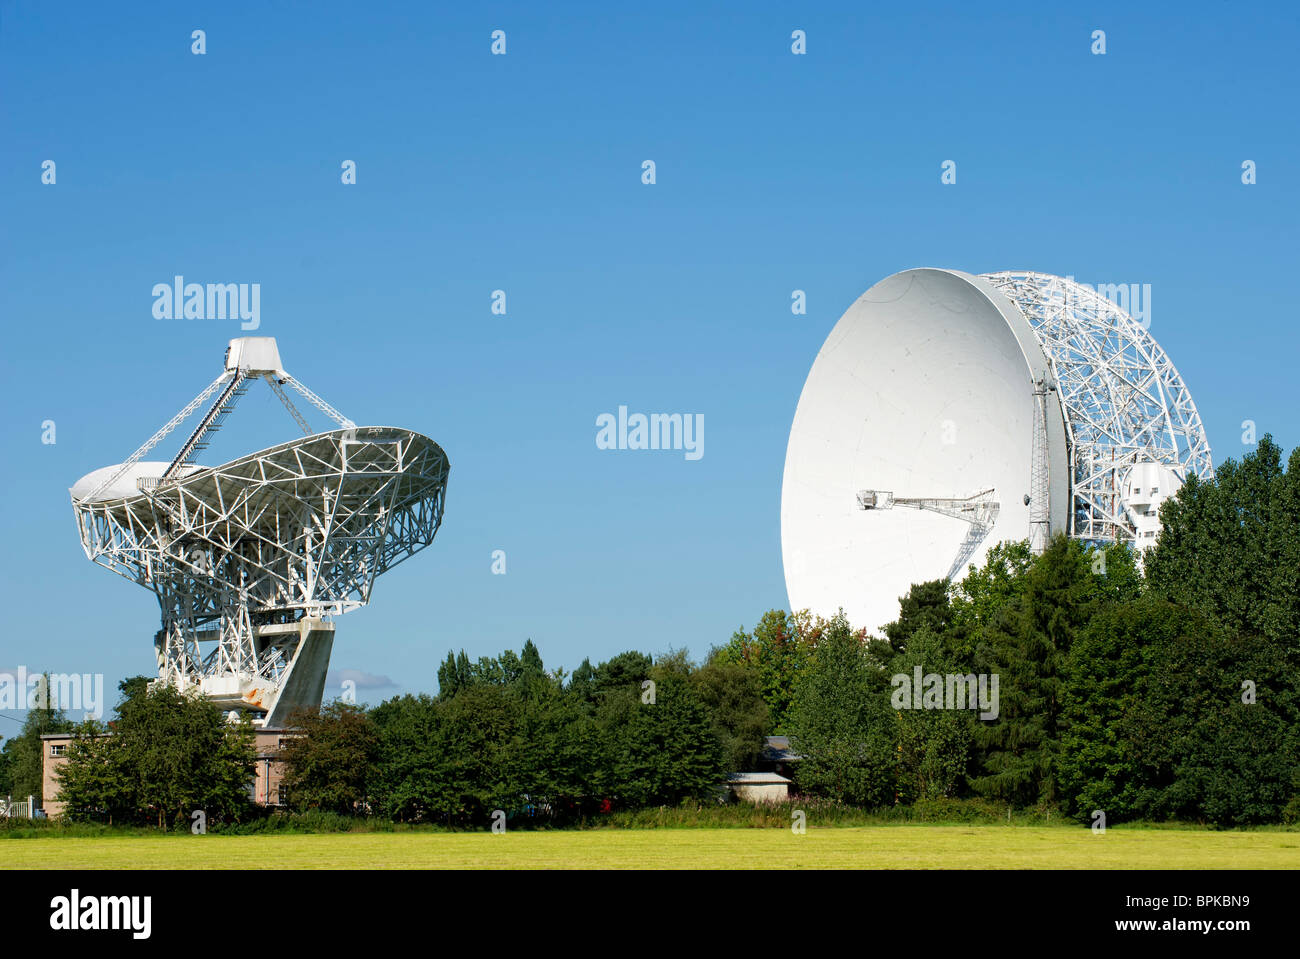 The Lovell telescope at the Jodrell Bank Observatory in Cheshire, England pictured with the smaller telescope known as Mark II Stock Photo